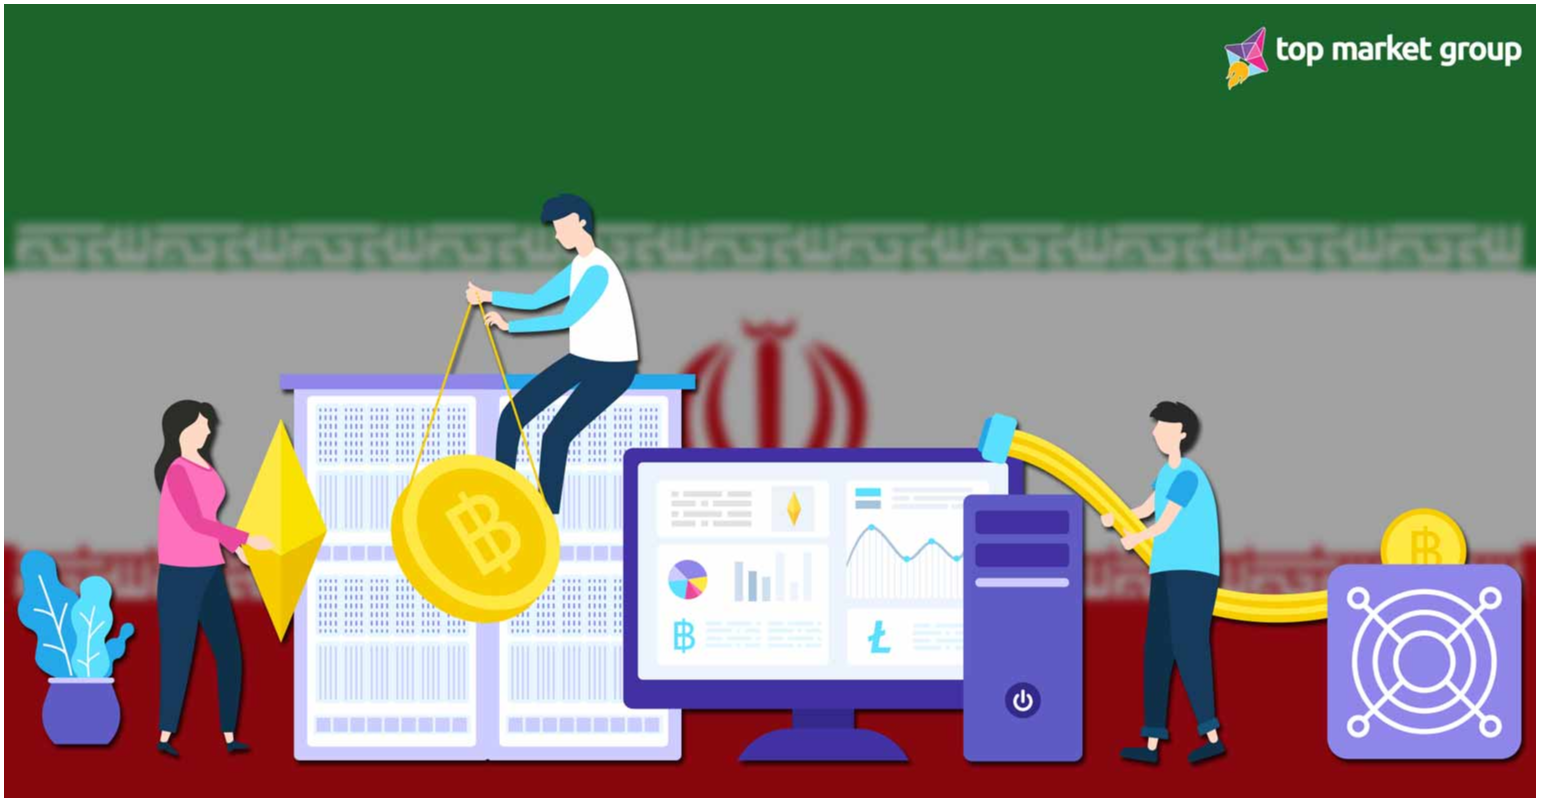 For Importing Crypto Mining Equipment, Iran Has Not Issued Any Licenses